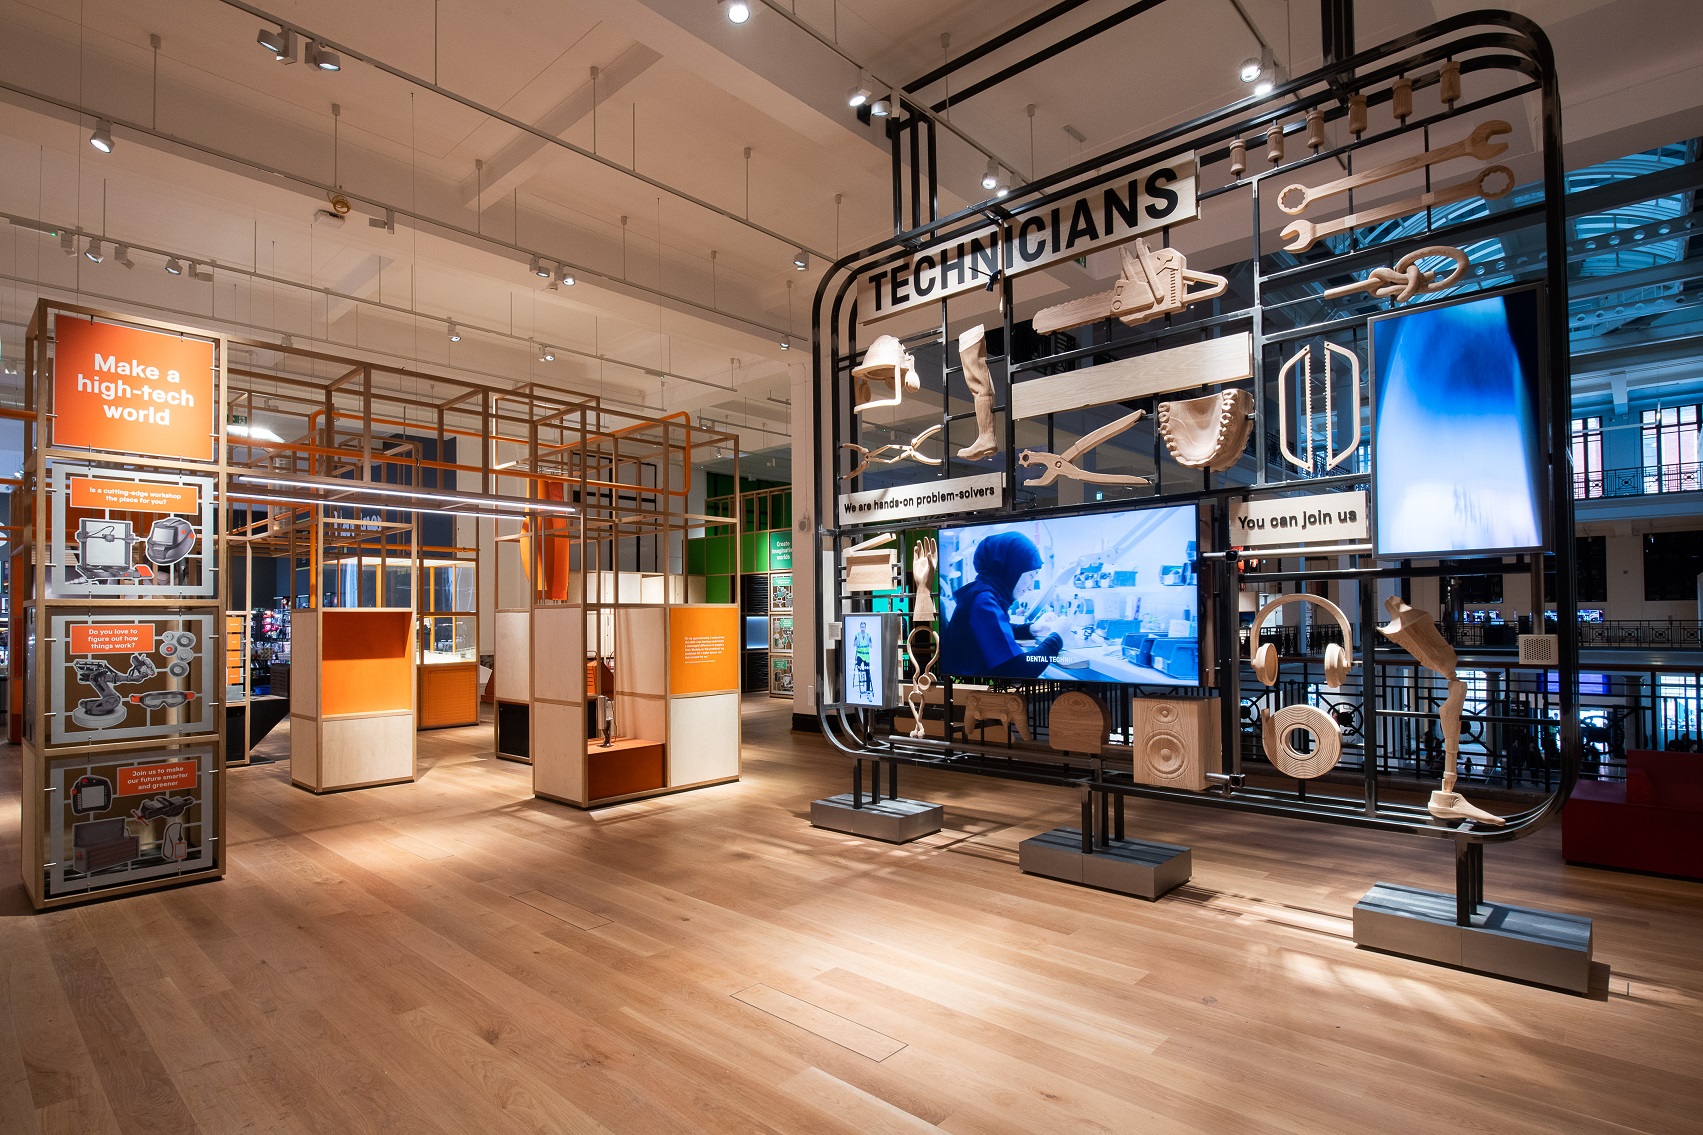 Britvic teams up with the Science Museum in new interactive gallery